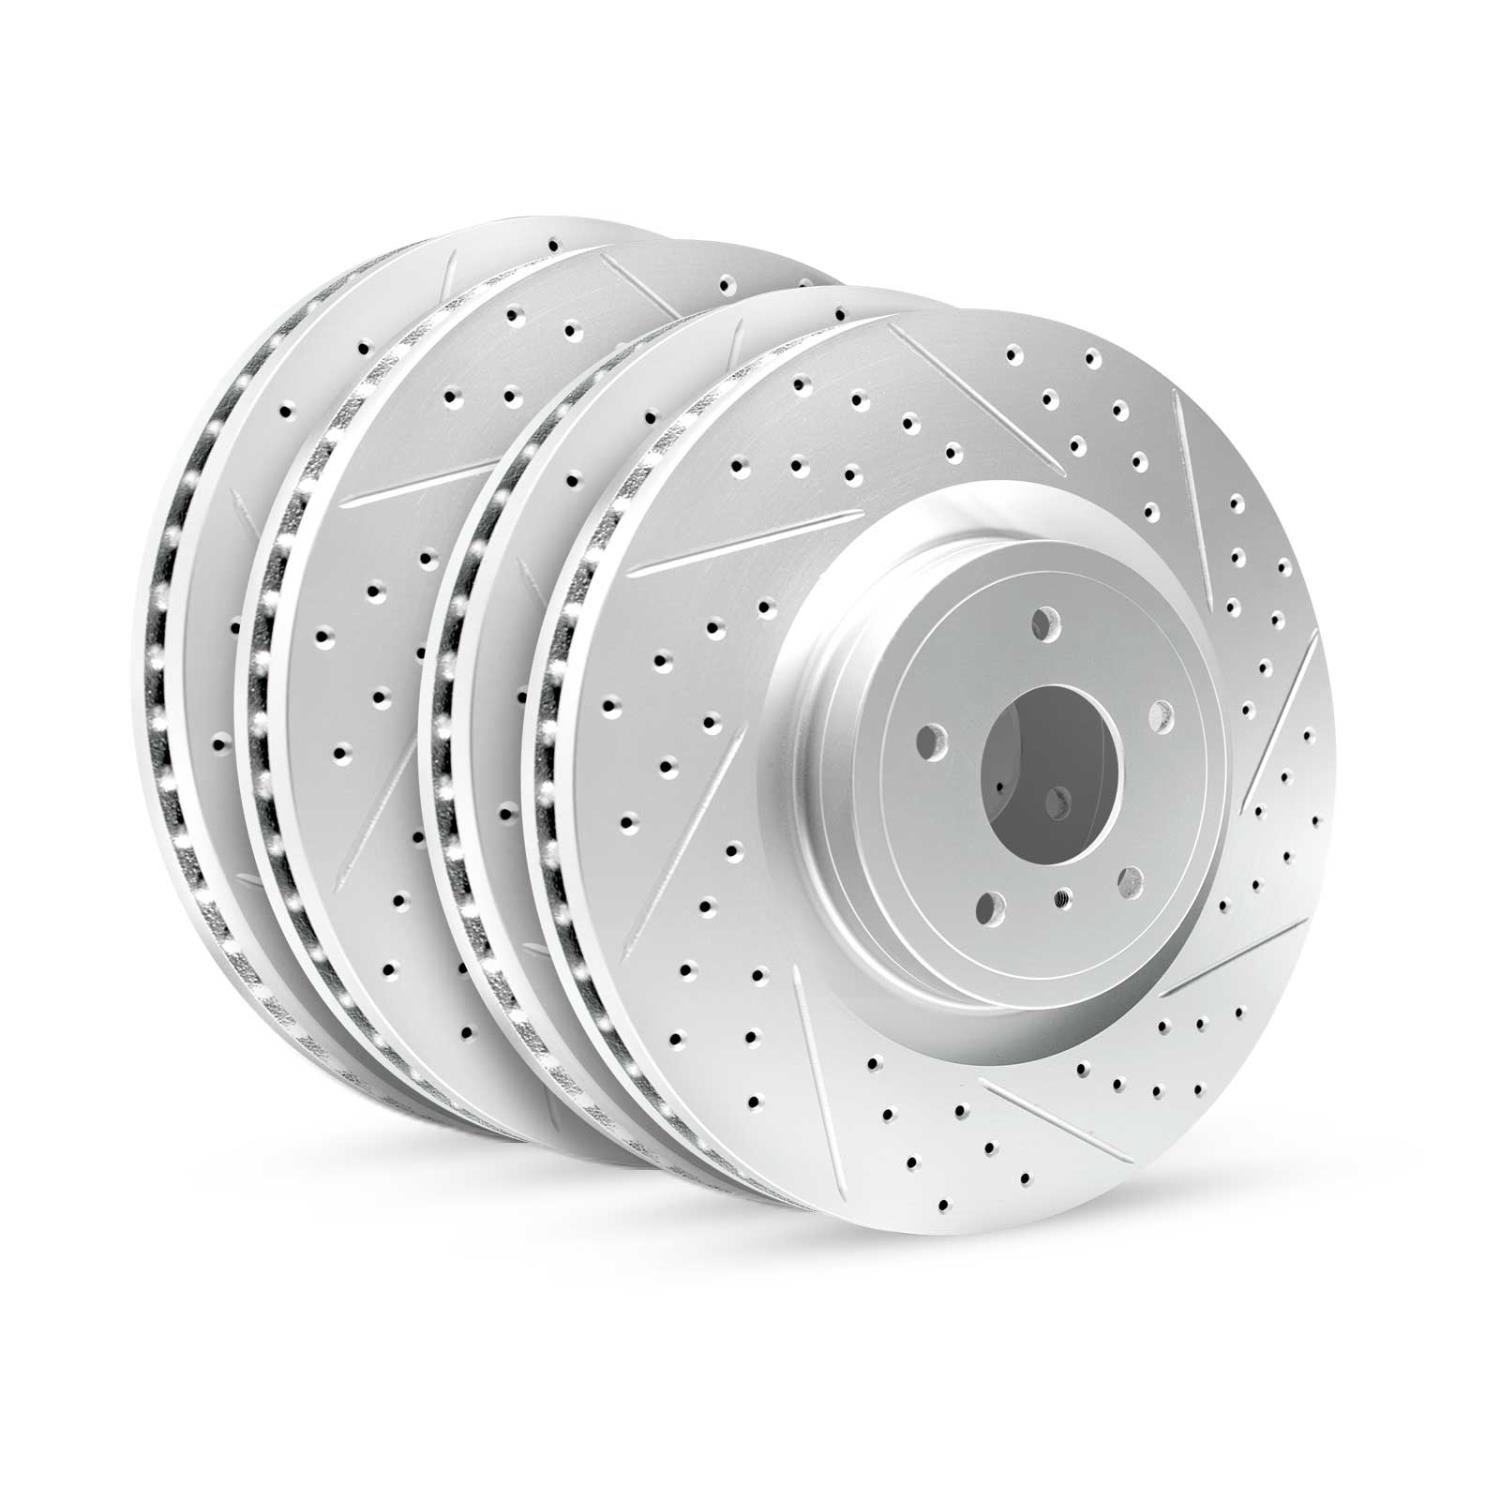 GEO-Carbon Drilled/Slotted Rotors, 2000-2002 Audi/Porsche/Volkswagen, Position: Front/Rear